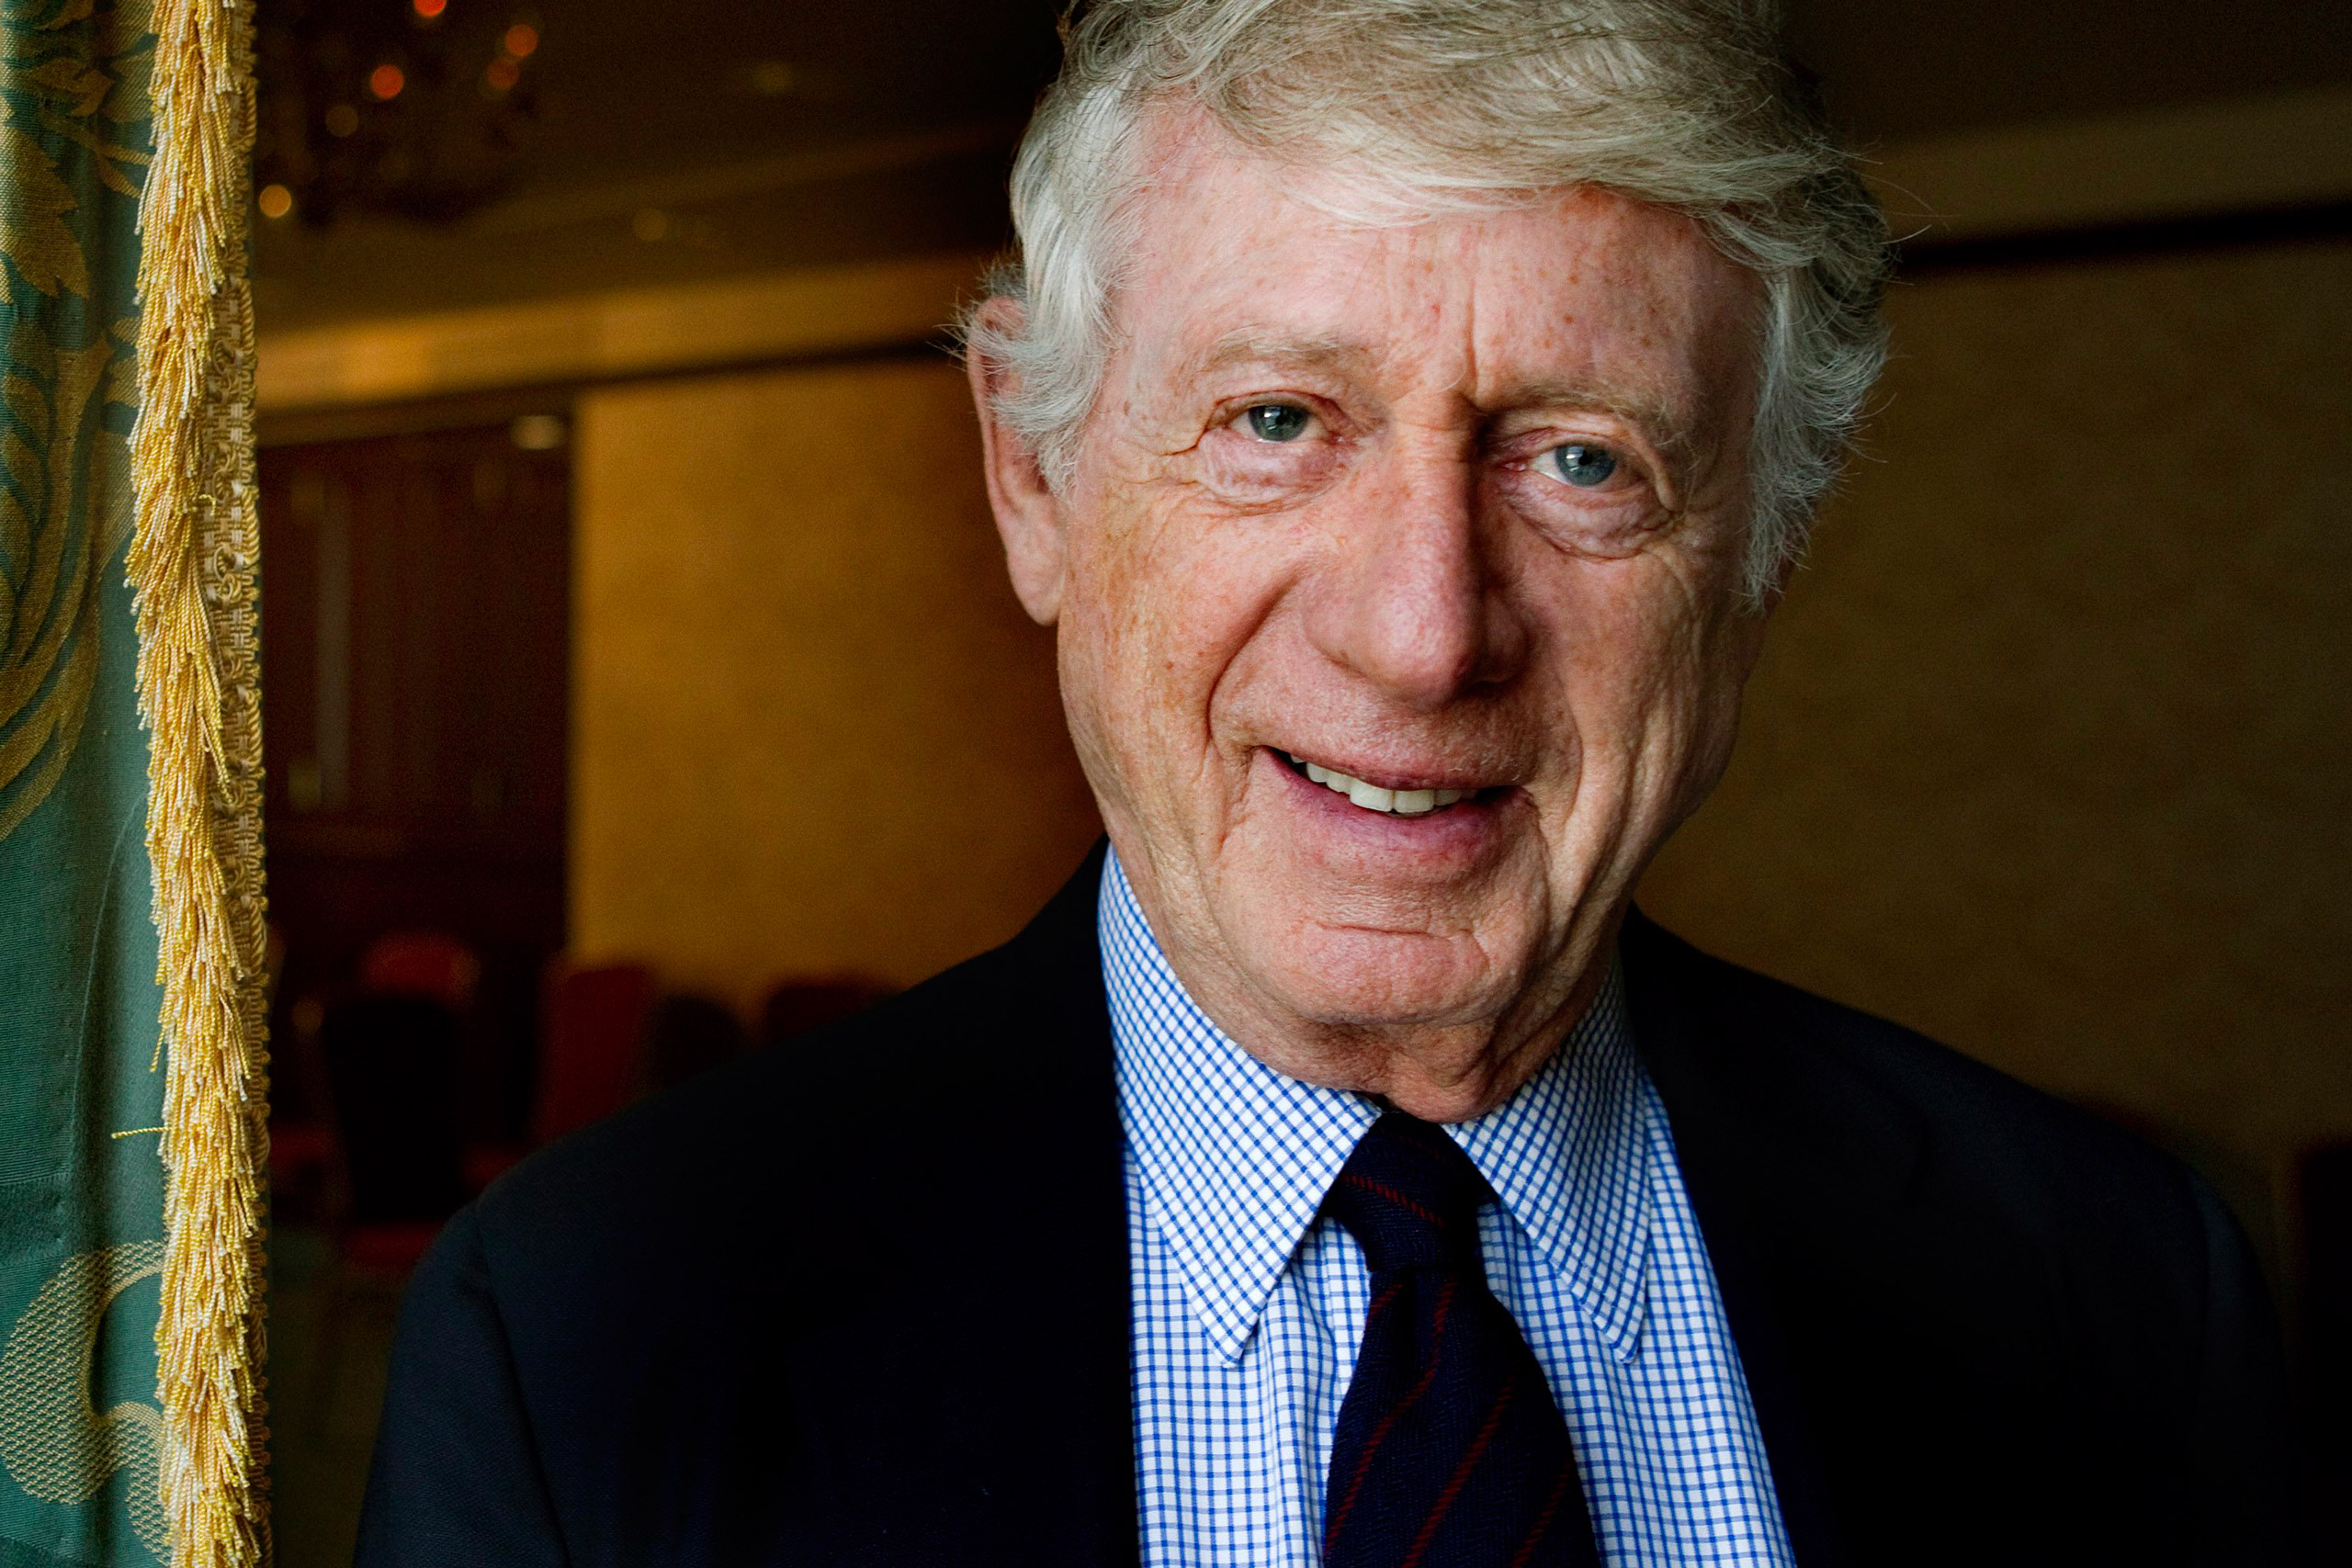 Former television journalist Ted Koppel poses for a photo in Toronto on June 7, 2012. (Chris Young—AP)